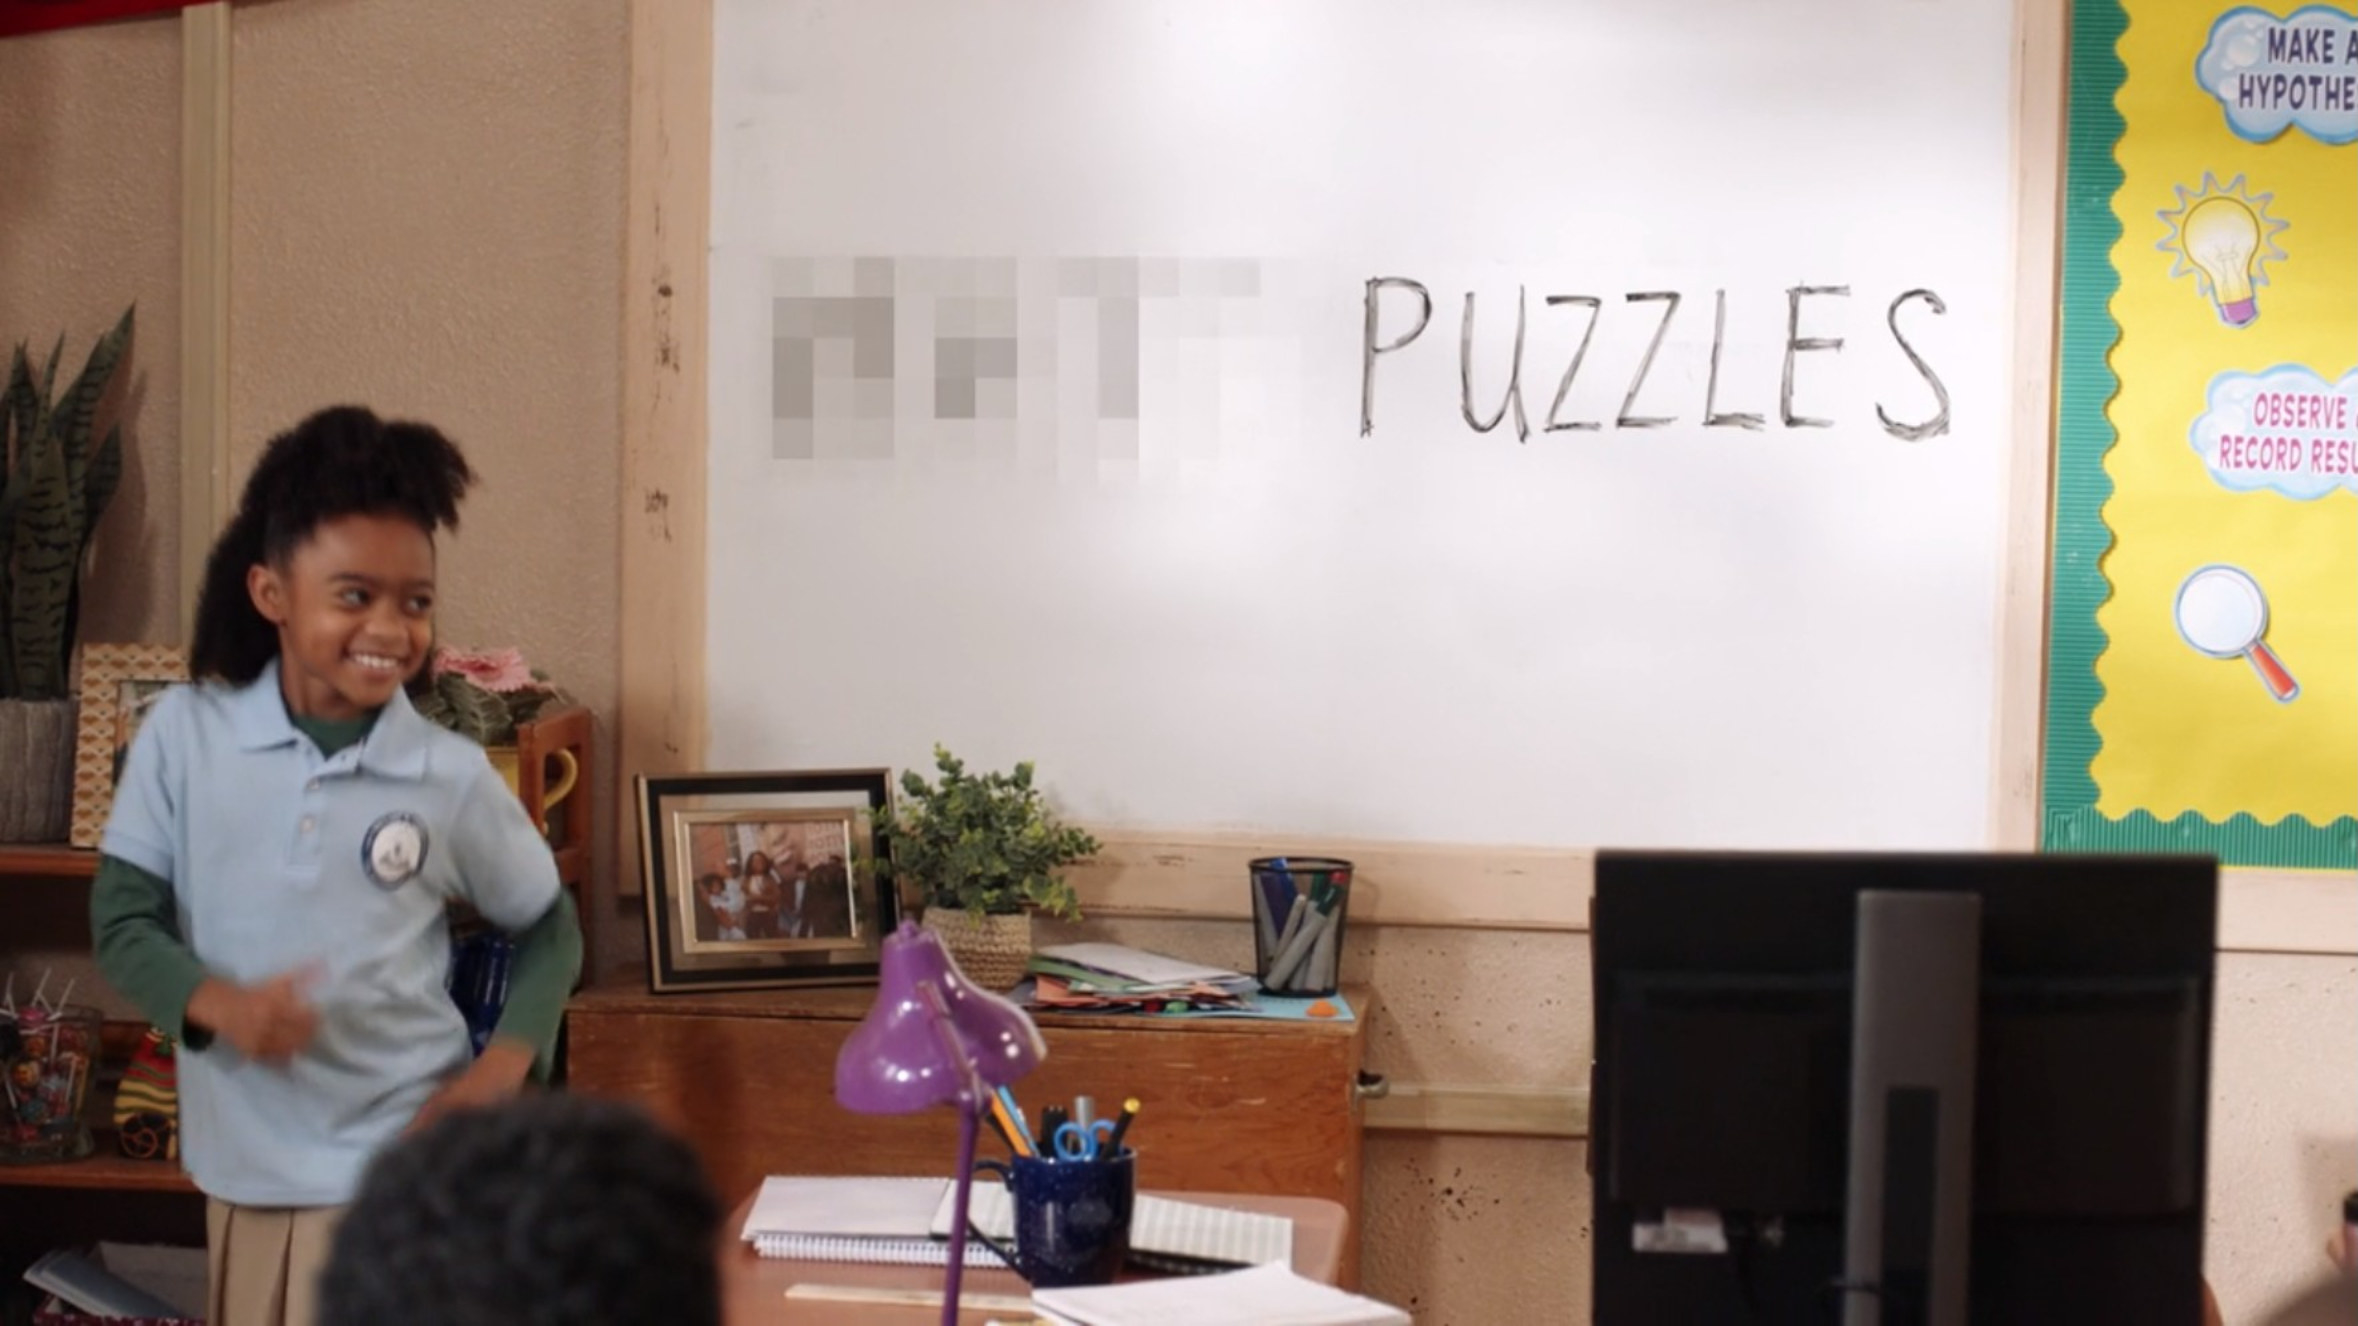 A young student is smiling as she dances next to a white board that reads &quot;[BLEEP] PUZZLES&quot;